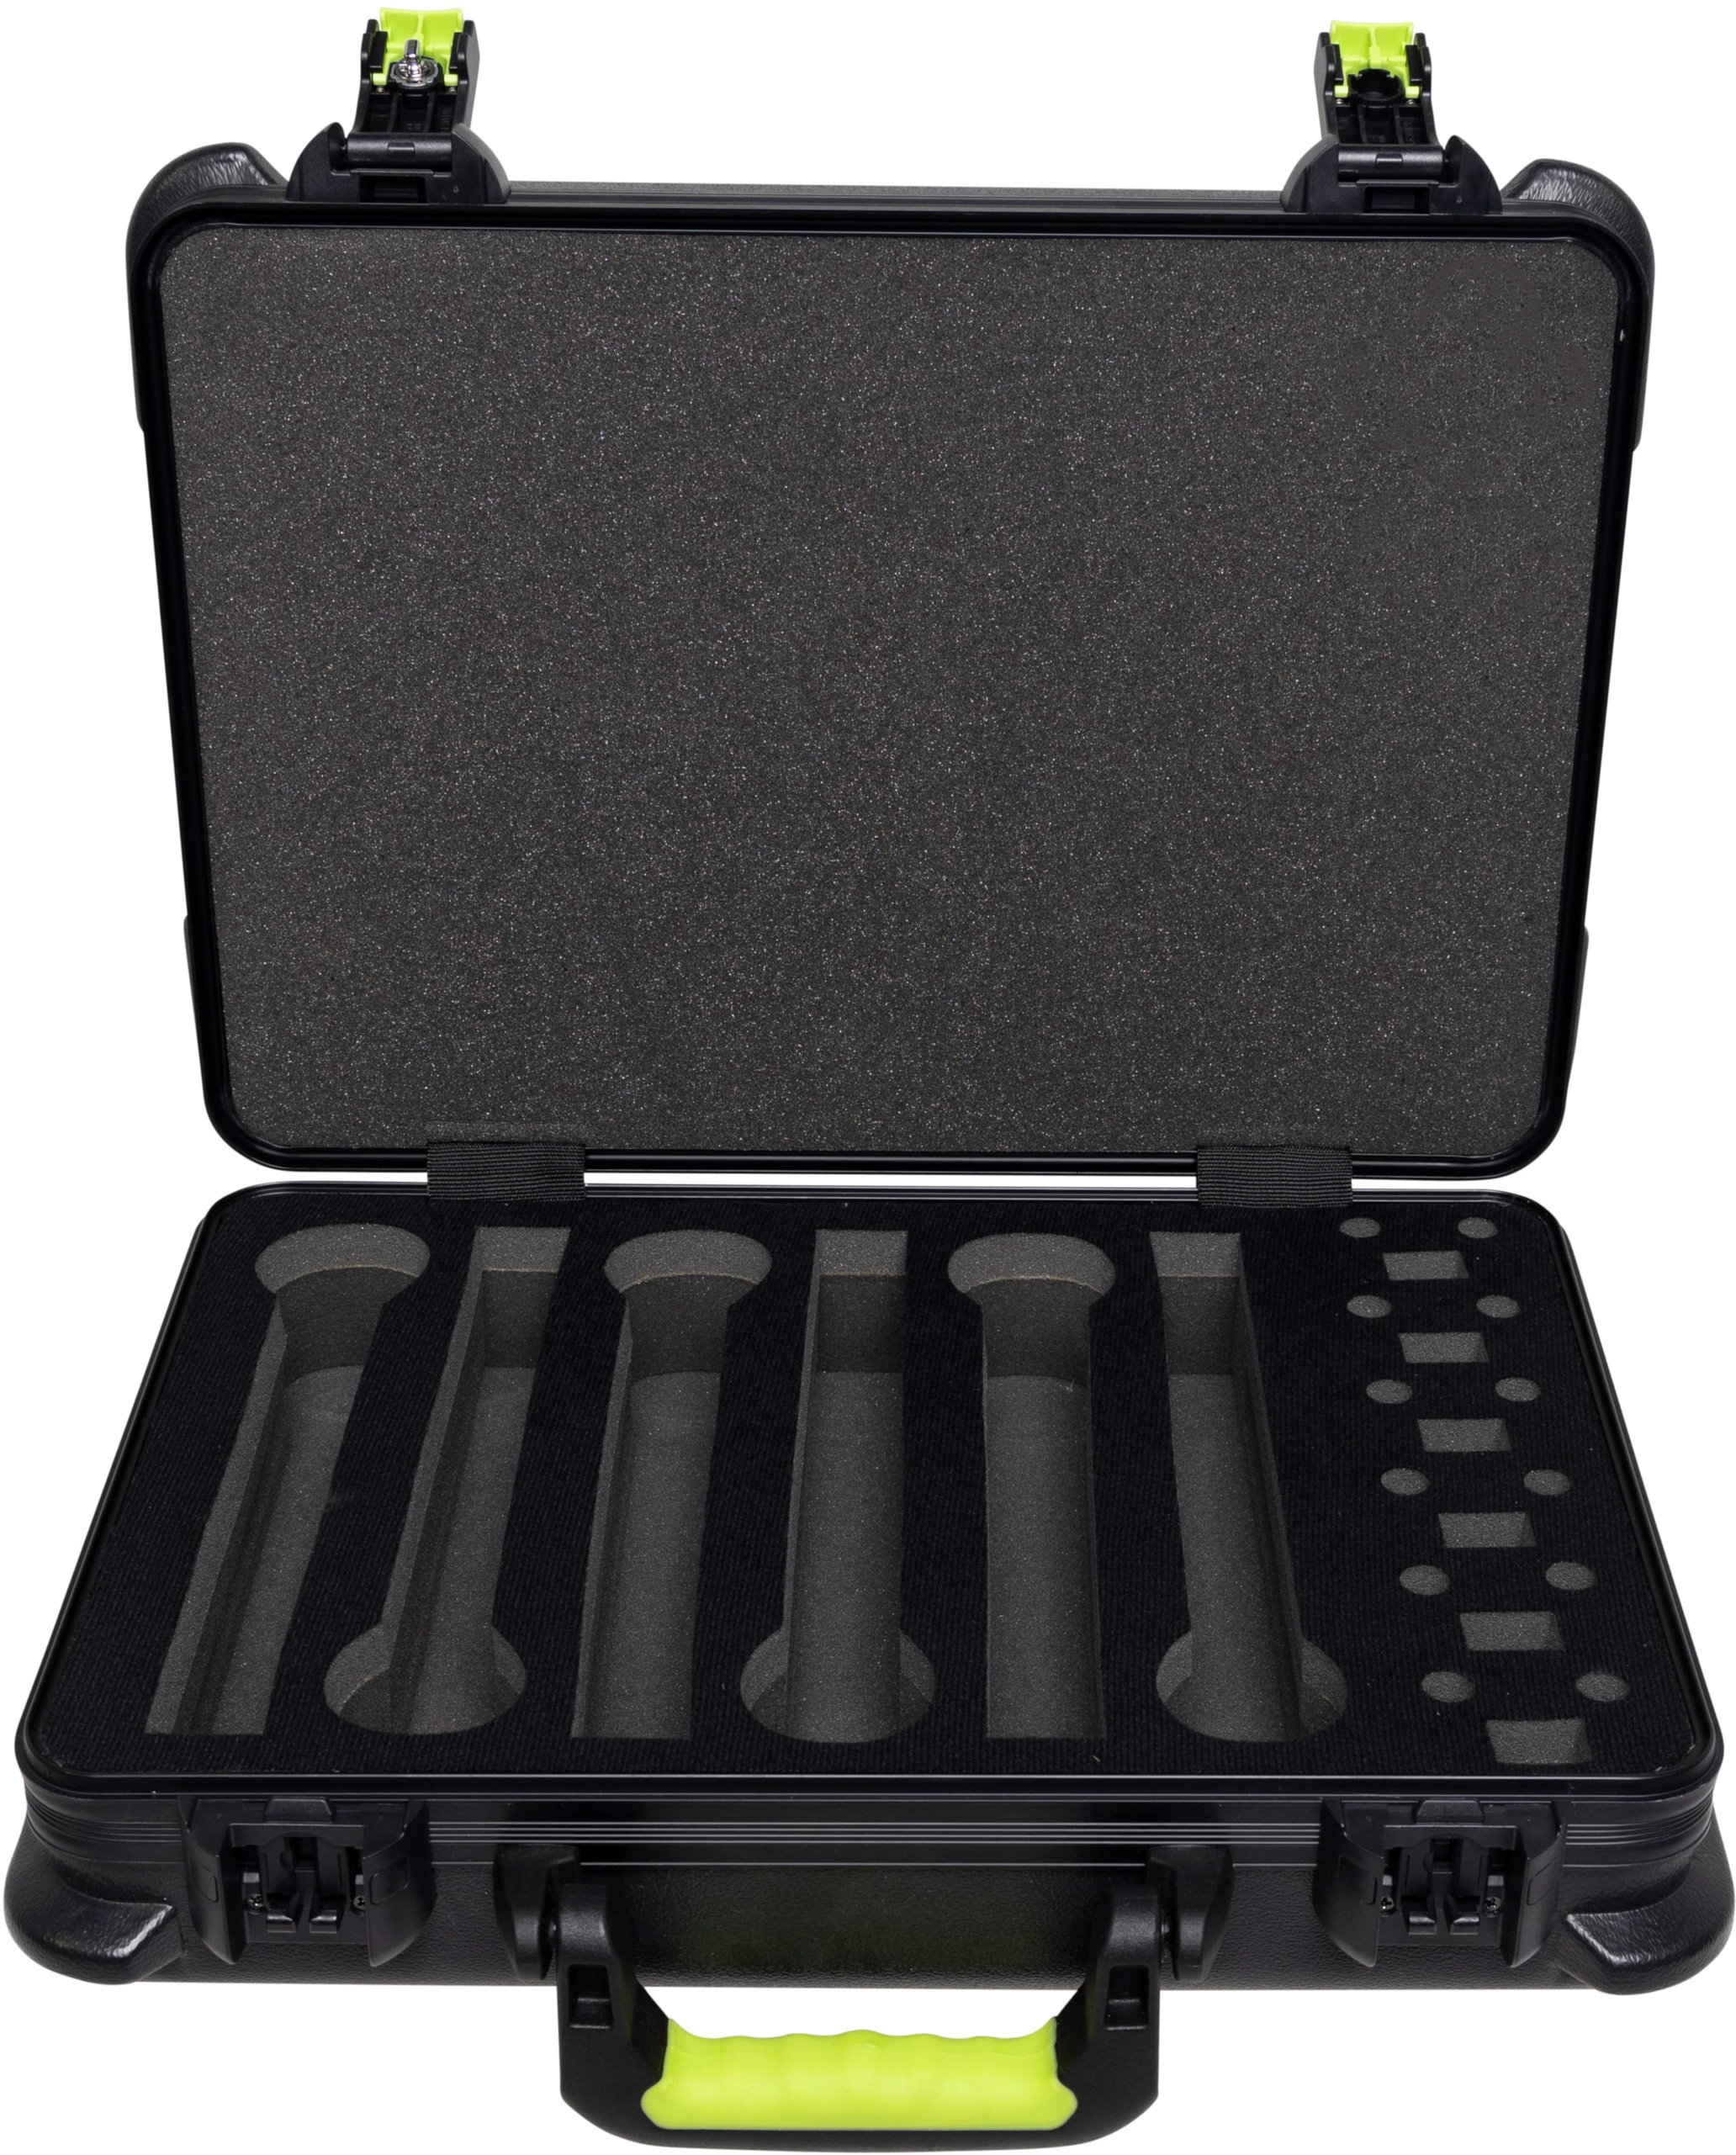 Gator Frameworks Mic Case W06 - Valise Pour 6 Micros Sans-fils - Flightcase for microphone - Main picture